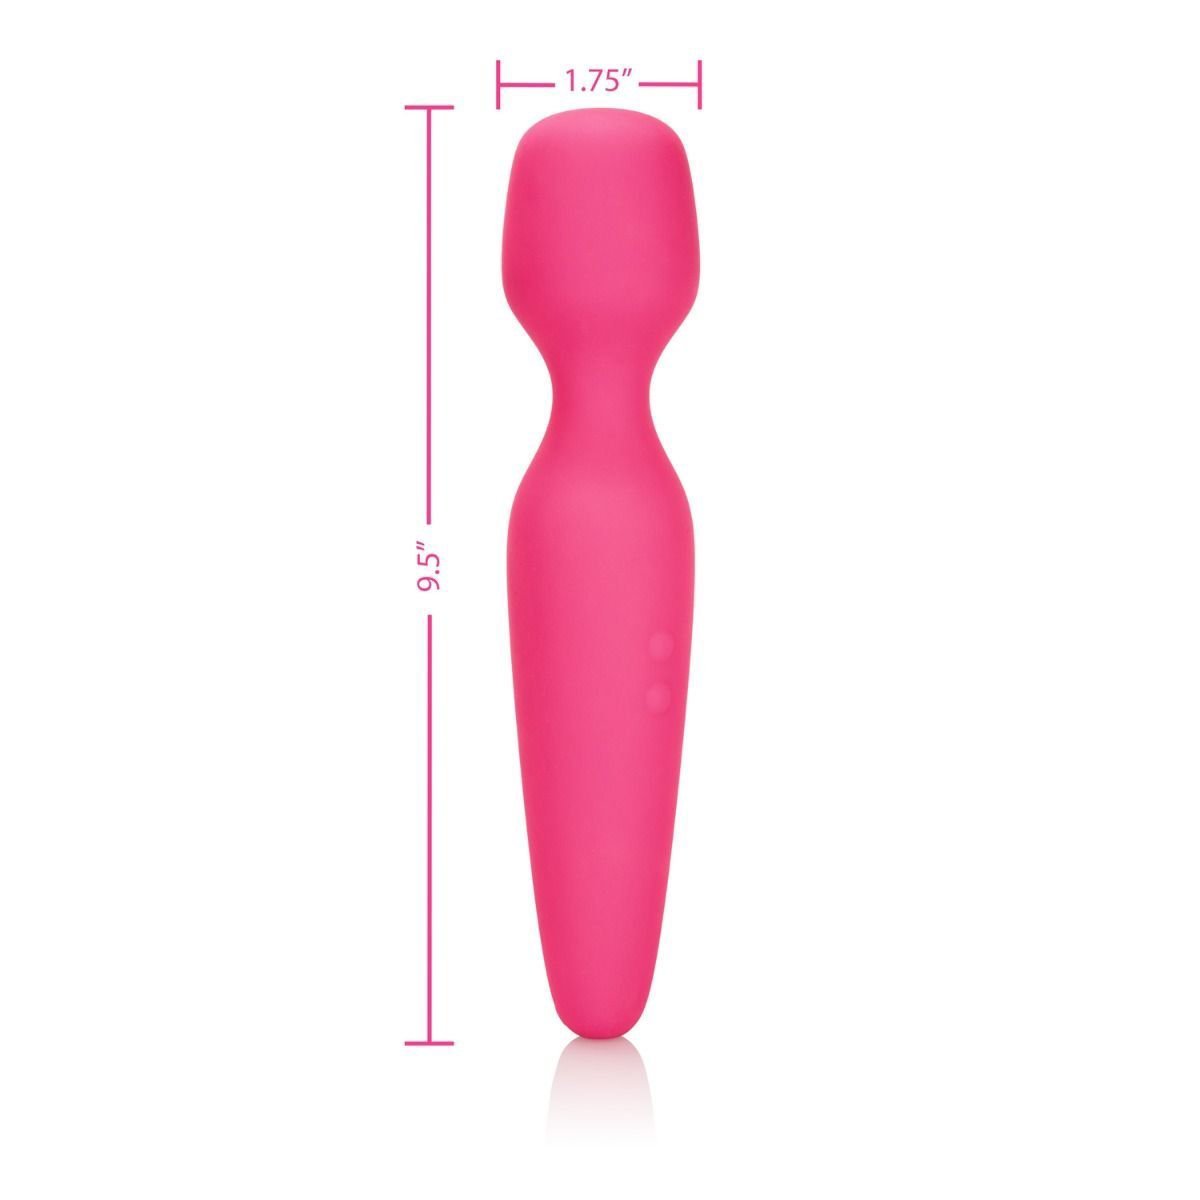 California Exotics - Utopia Rechargeable Vibrating Massage Wand (Pink) -  Wand Massagers (Vibration) Rechargeable  Durio.sg